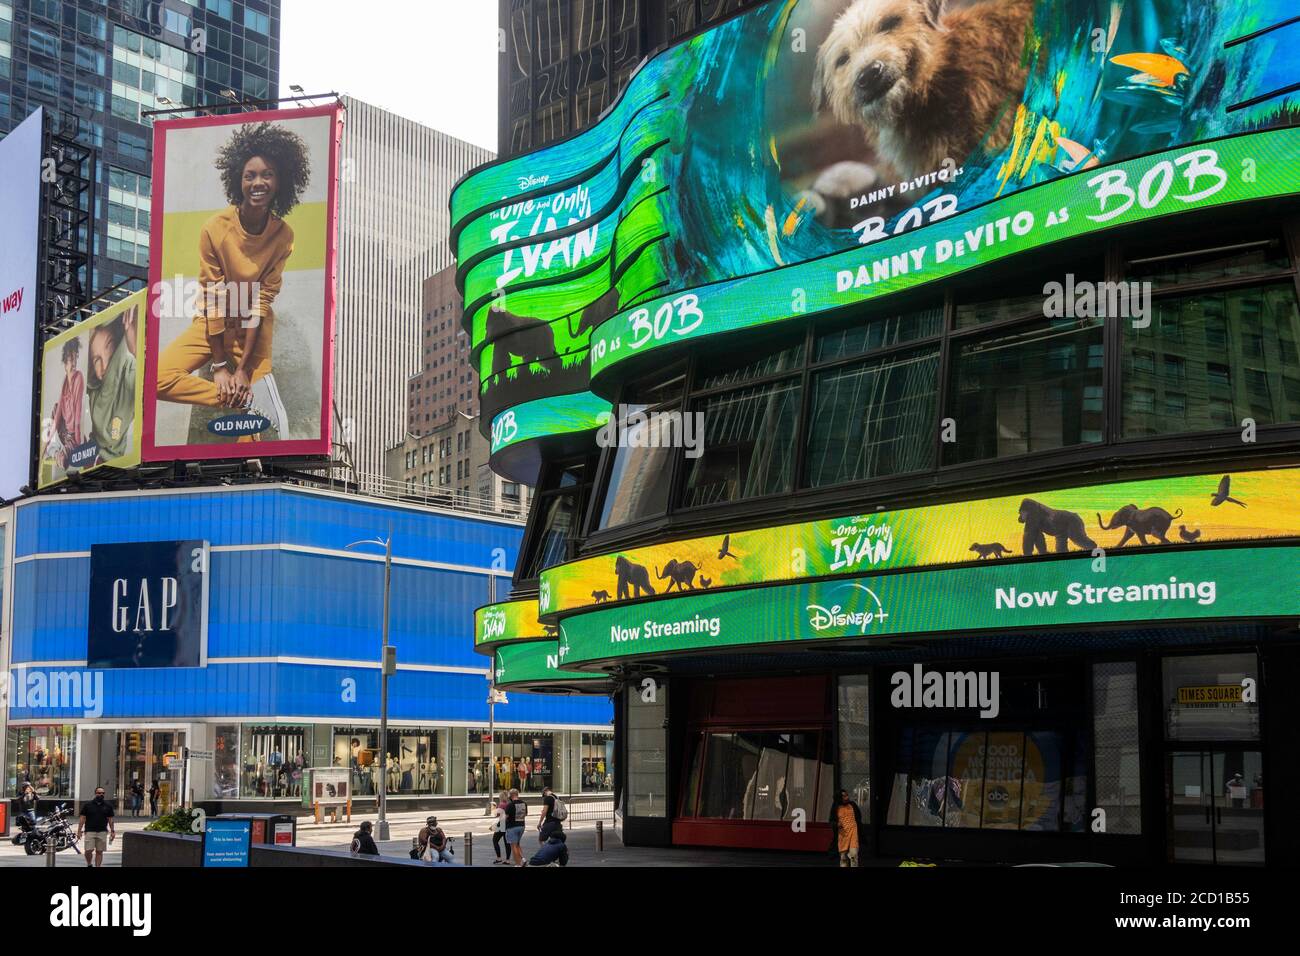 Wrap Around Moving Billboard at ABC TV News Network Studios in Times Square, NYC, USA Stock Photo